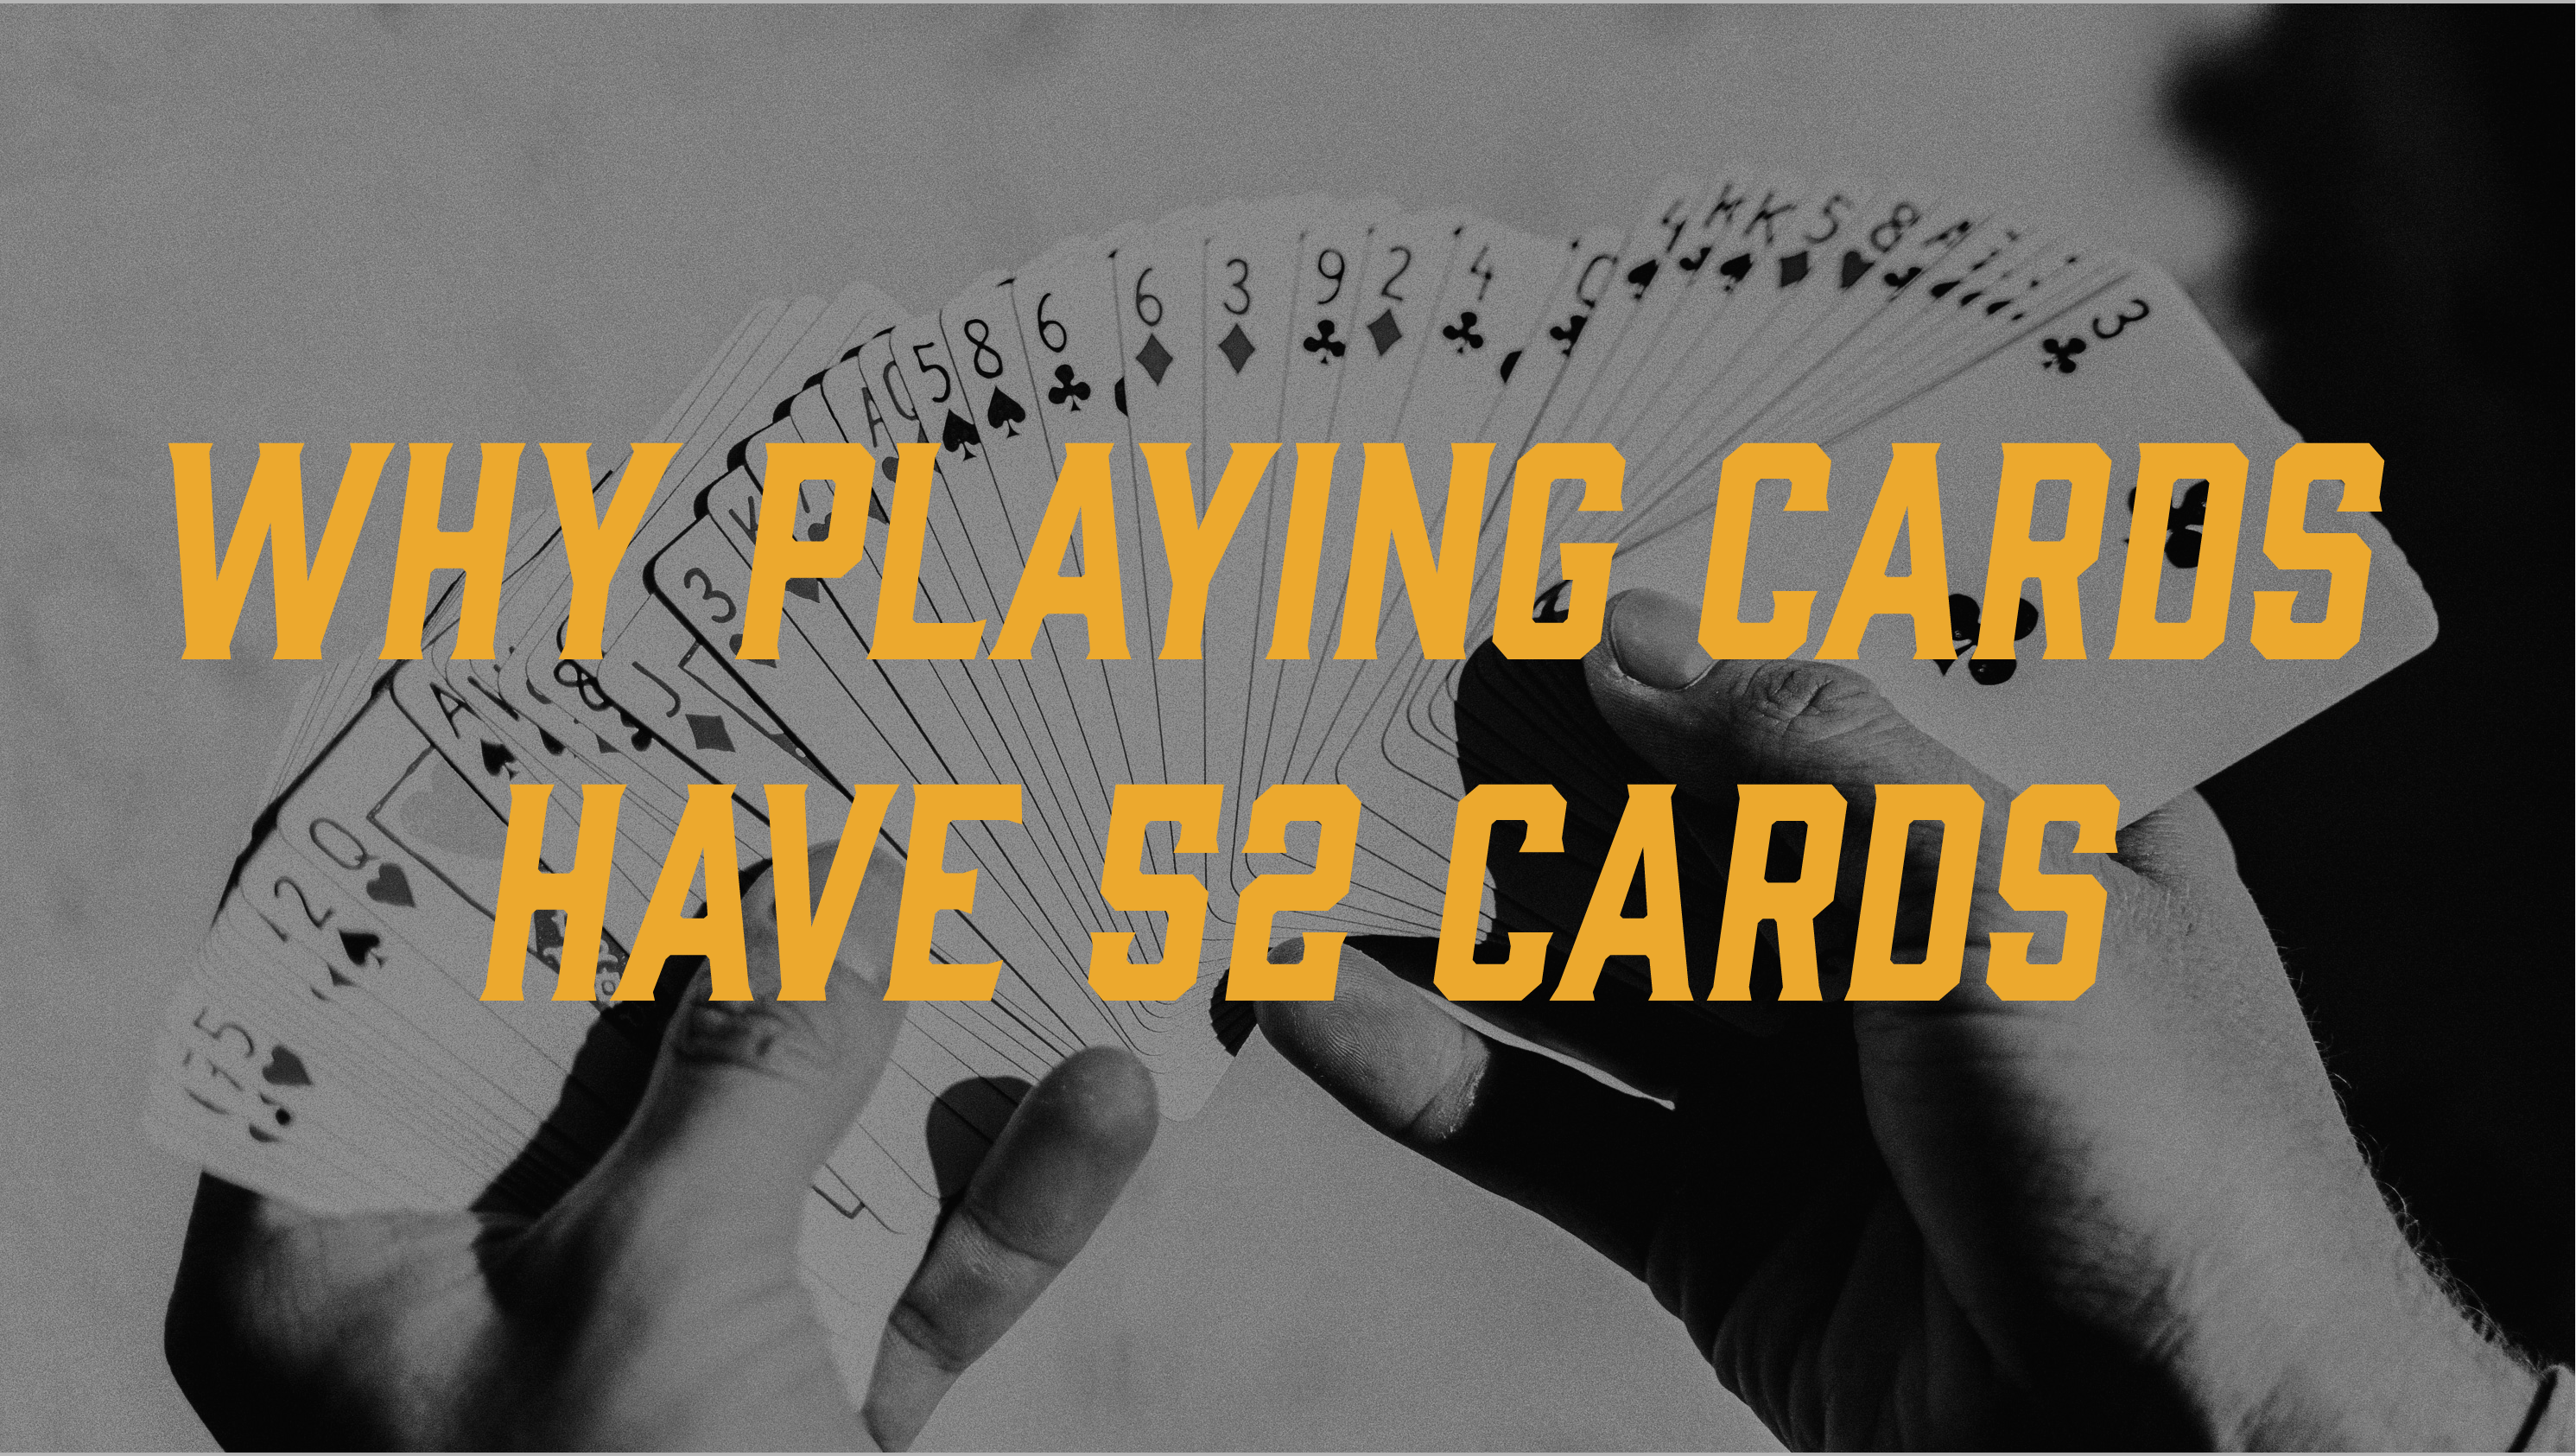 Why Do Playing Cards Have 52 Cards?